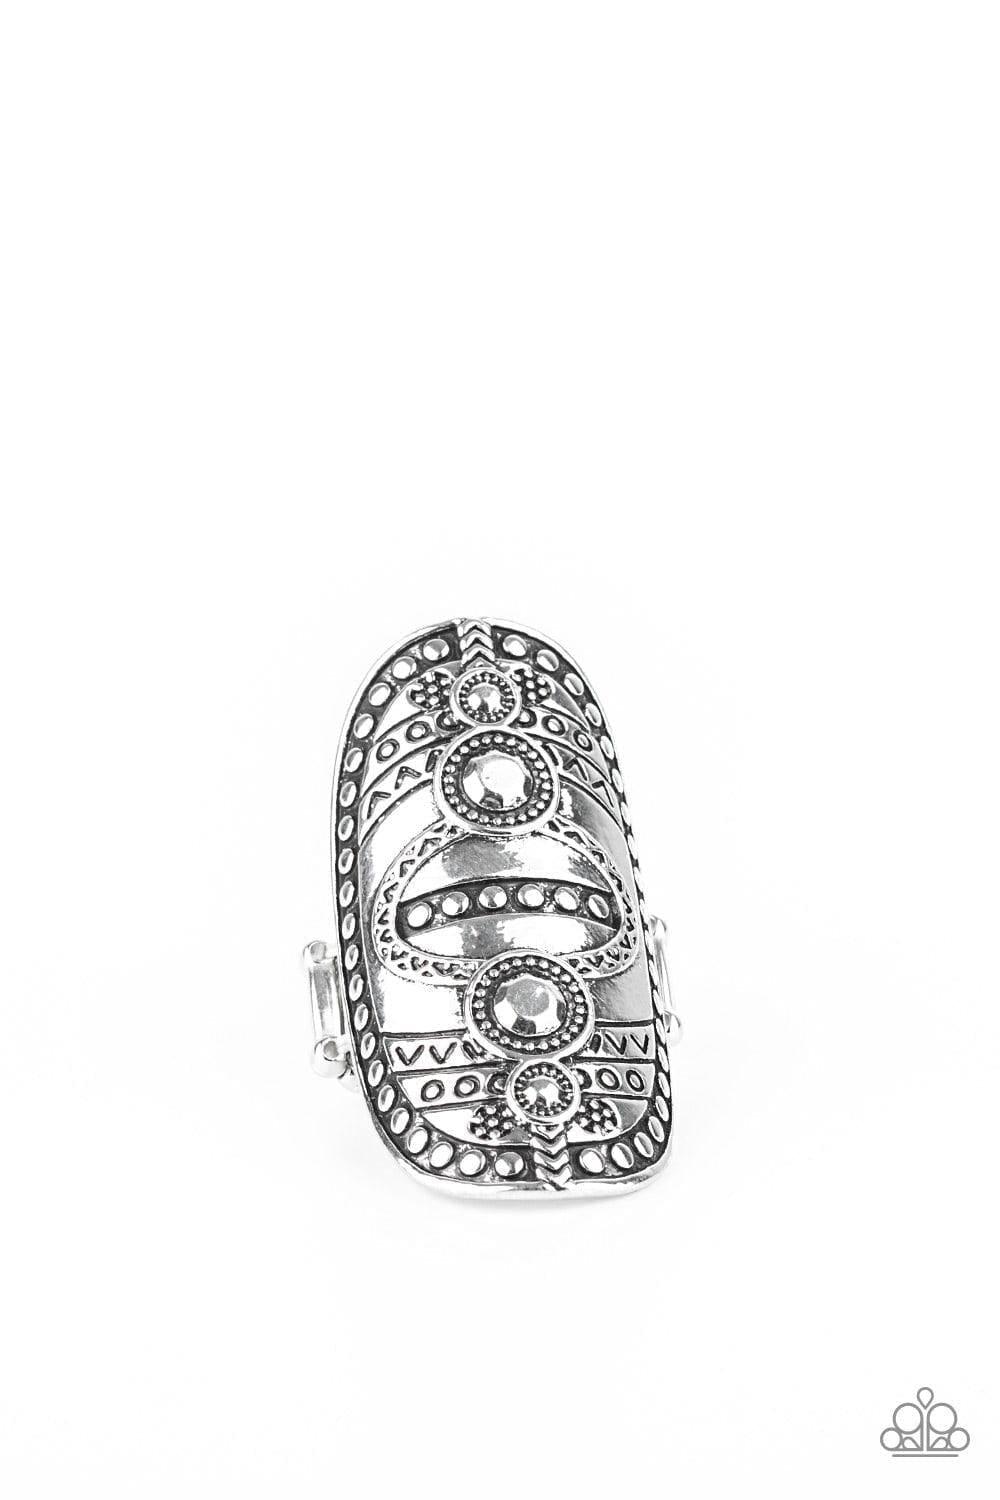 Paparazzi Accessories - Tiki Trail - Silver Ring - Bling by JessieK